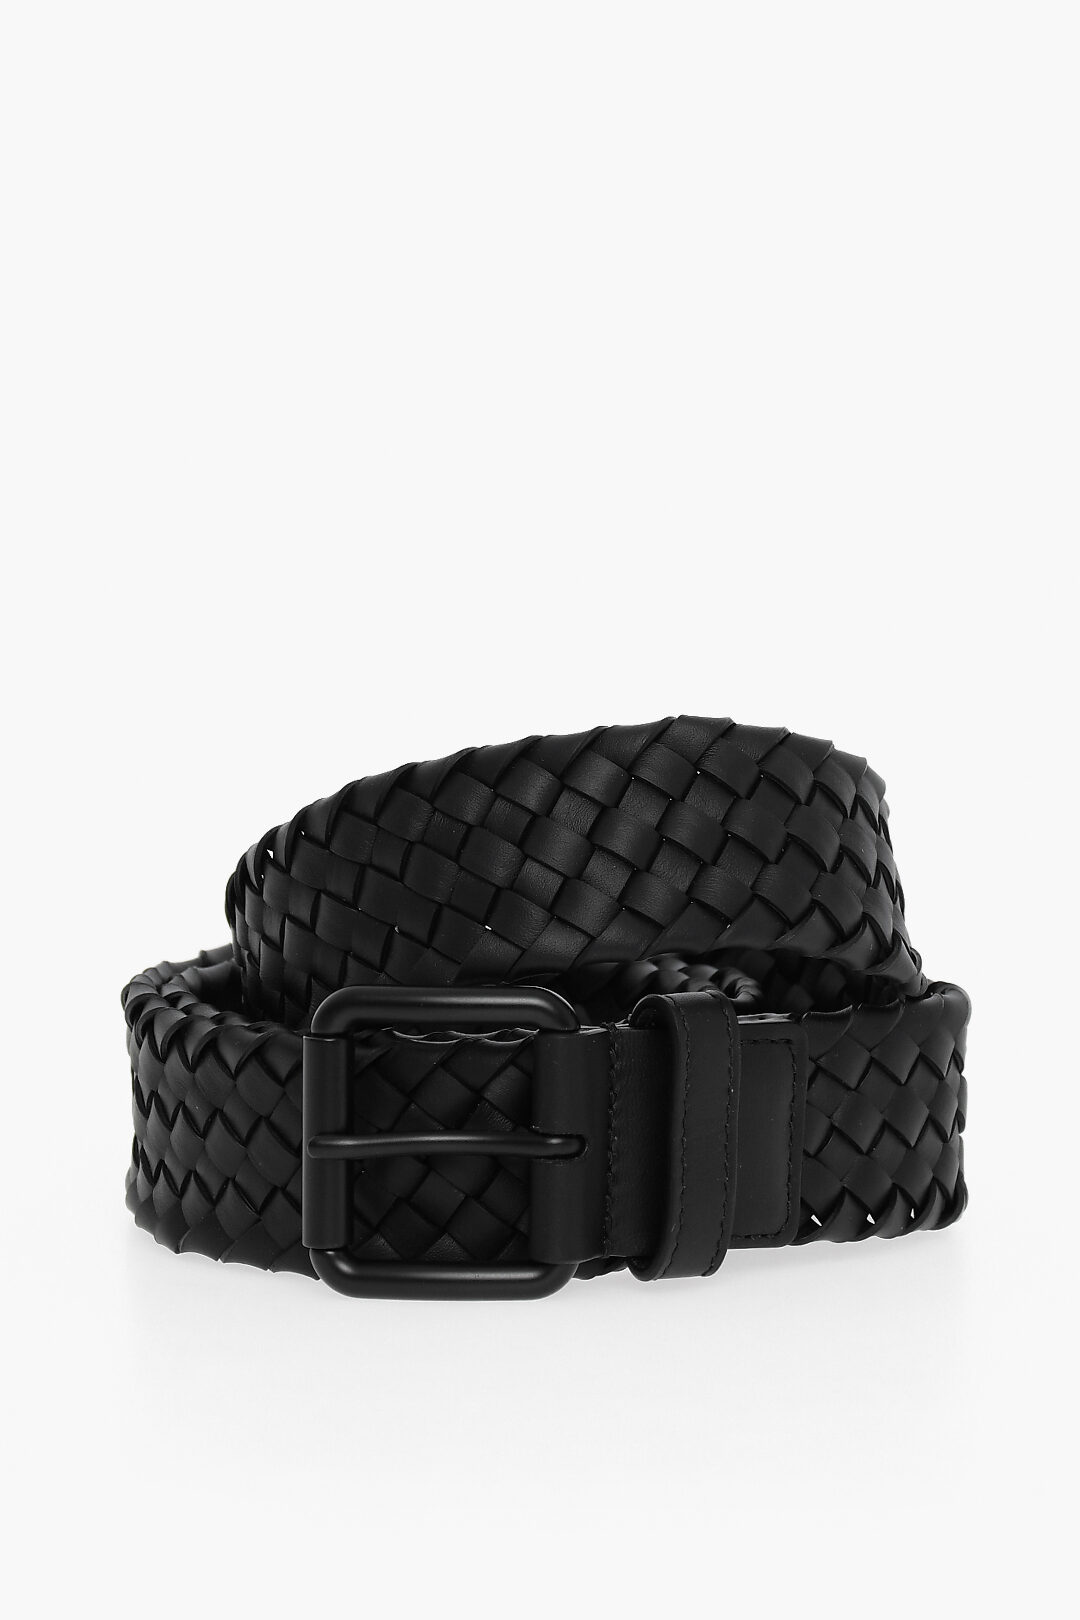 https://data.glamood.com/imgprodotto/woven-leather-belt-with-brass-buckle_1402450_zoom.jpg